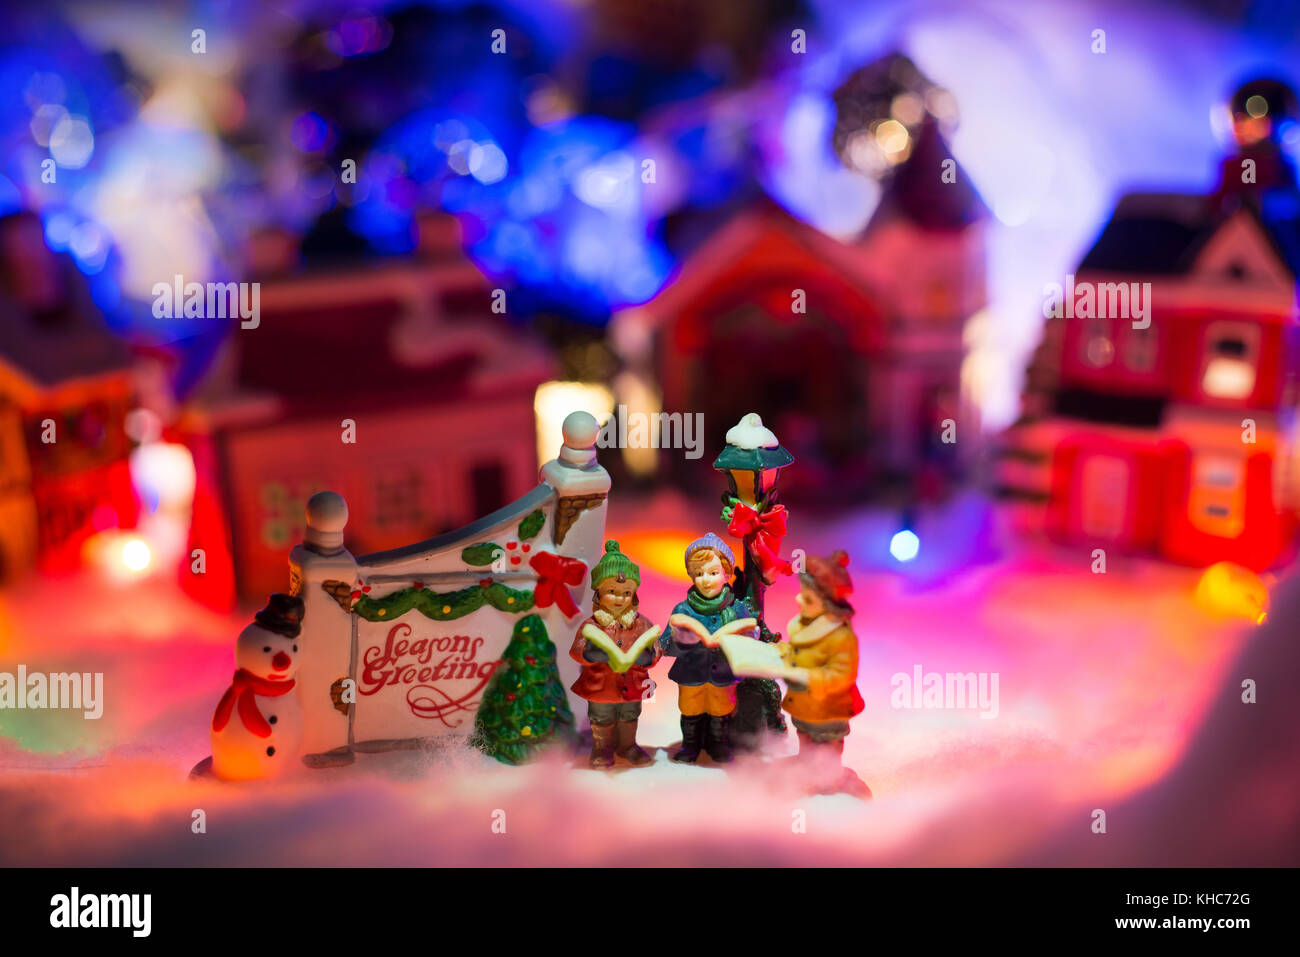 Christmas background with kids reading bible next to season greeting sign in front of snowy village Stock Photo